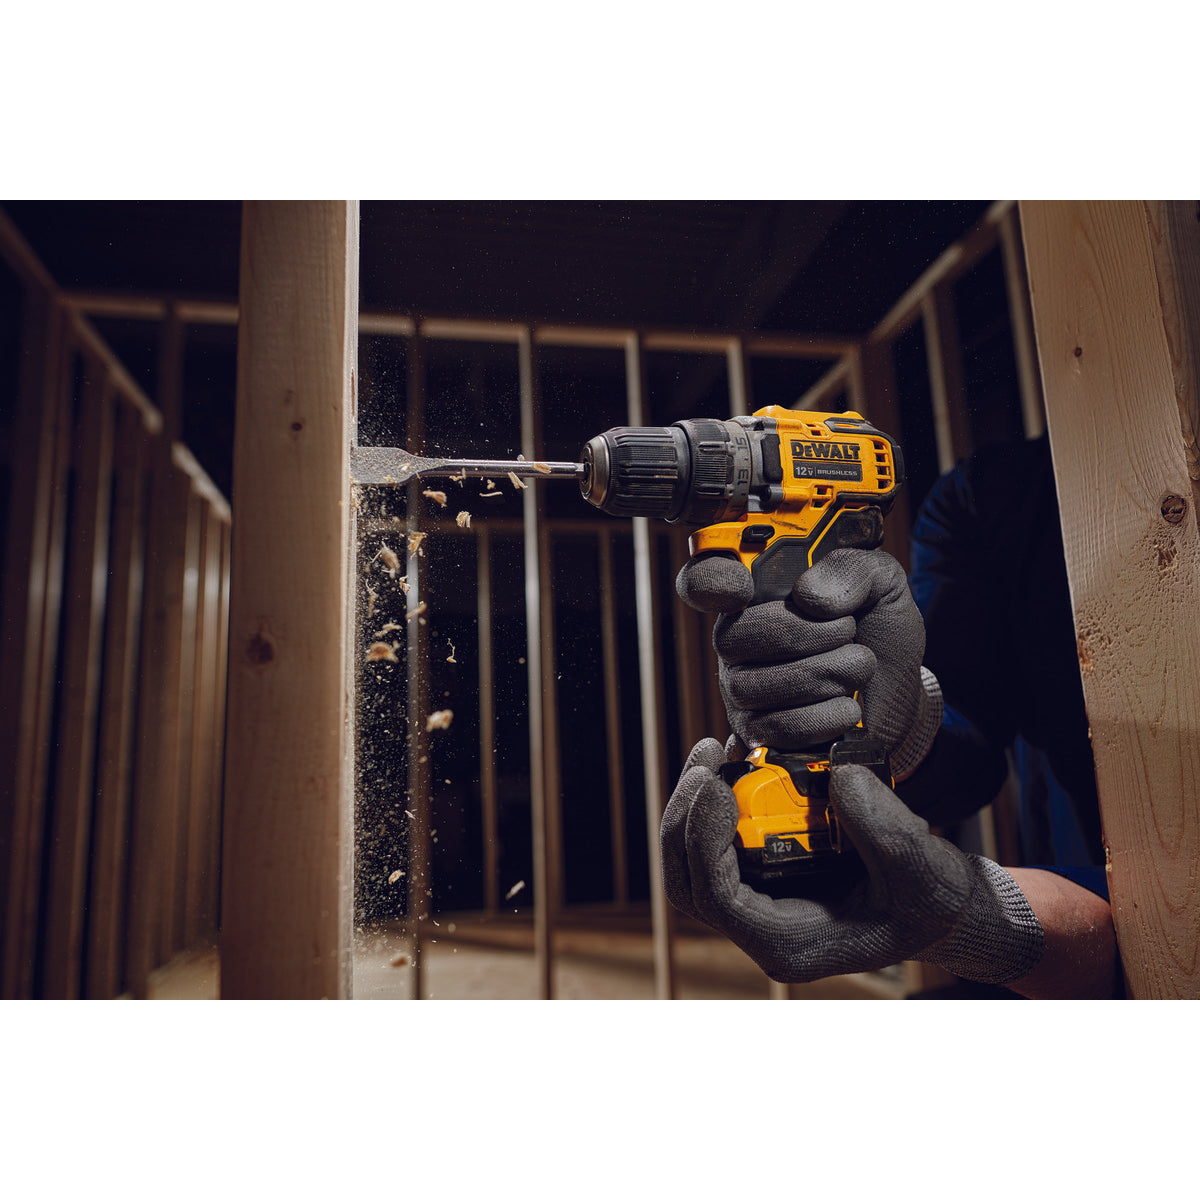 DEWALT DCD701F2 XTREME™ 12V MAX* BRUSHLESS 3/8 IN. CORDLESS DRILL/DRIVER KIT - wise-line-tools